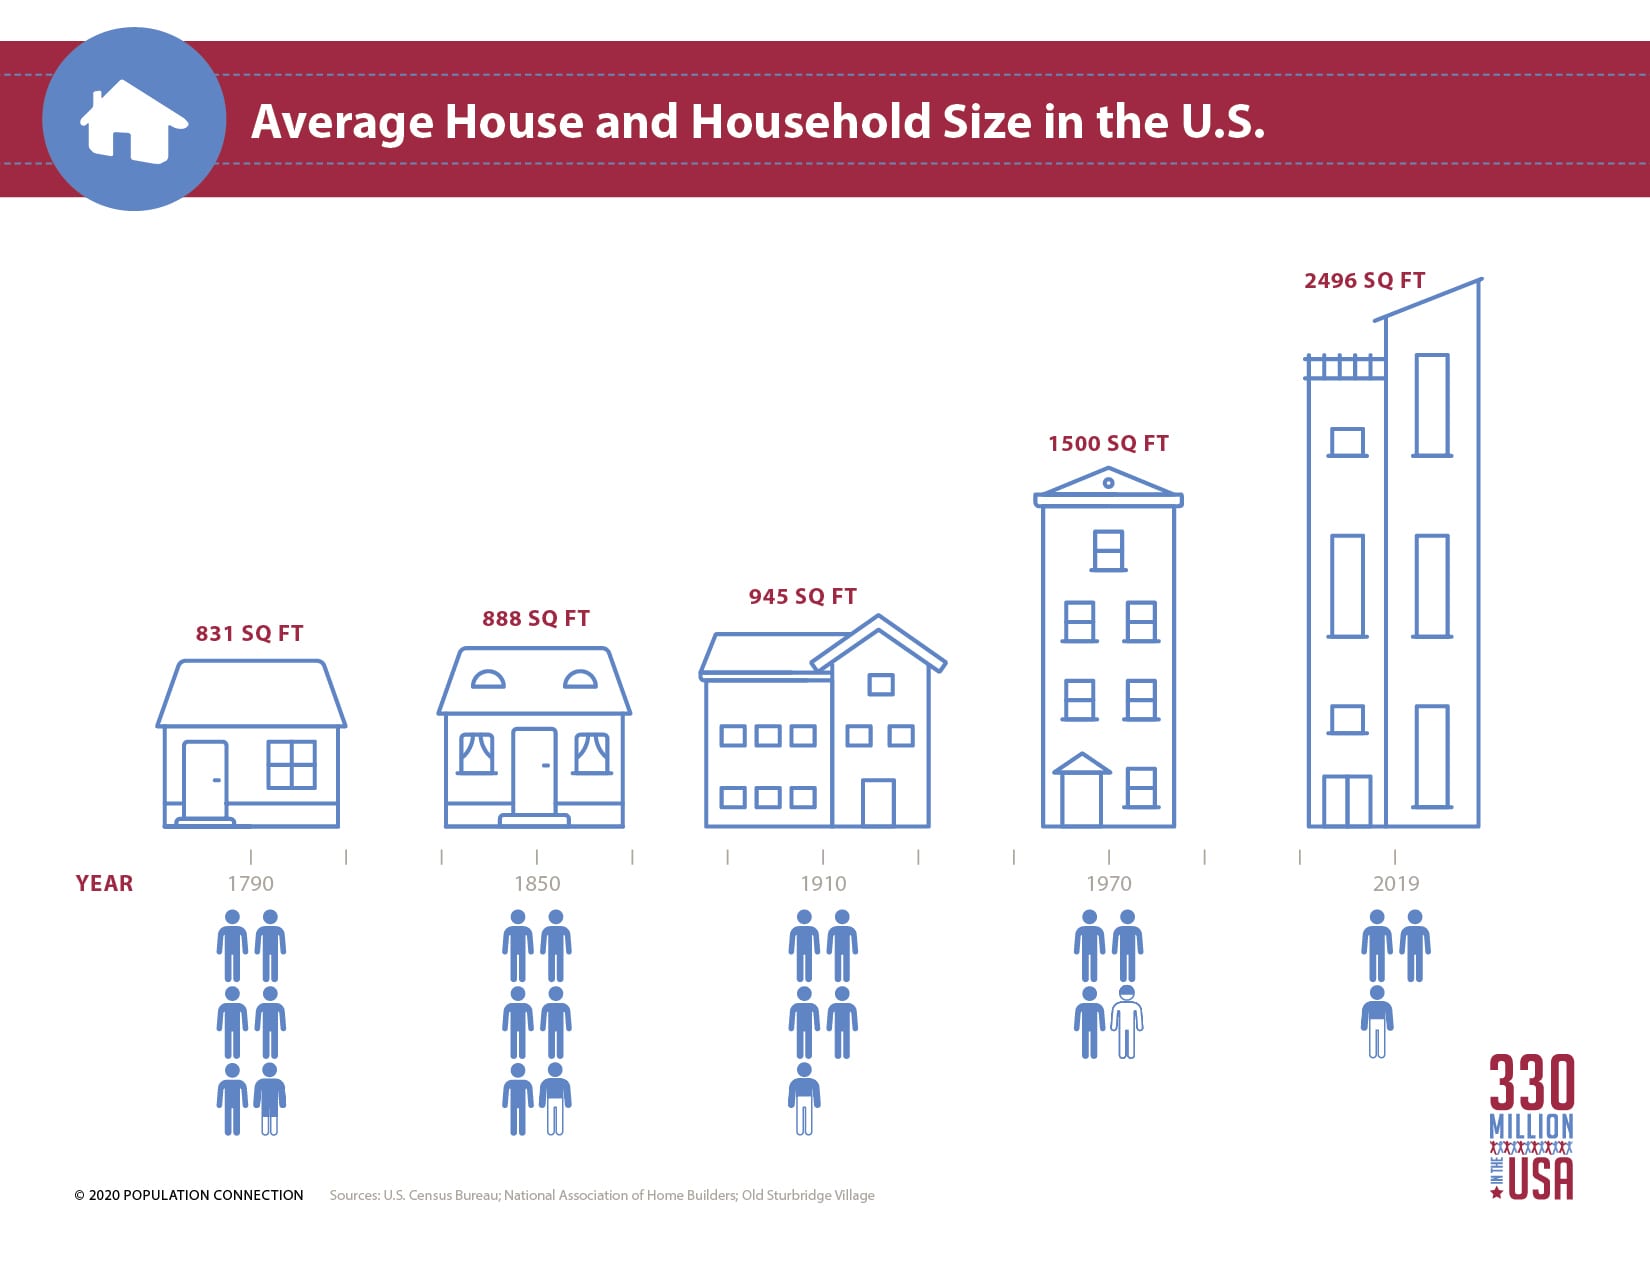 Infographic shows the average U.S. house size (in sq ft) and the average number of people per household from 1790 to 2019